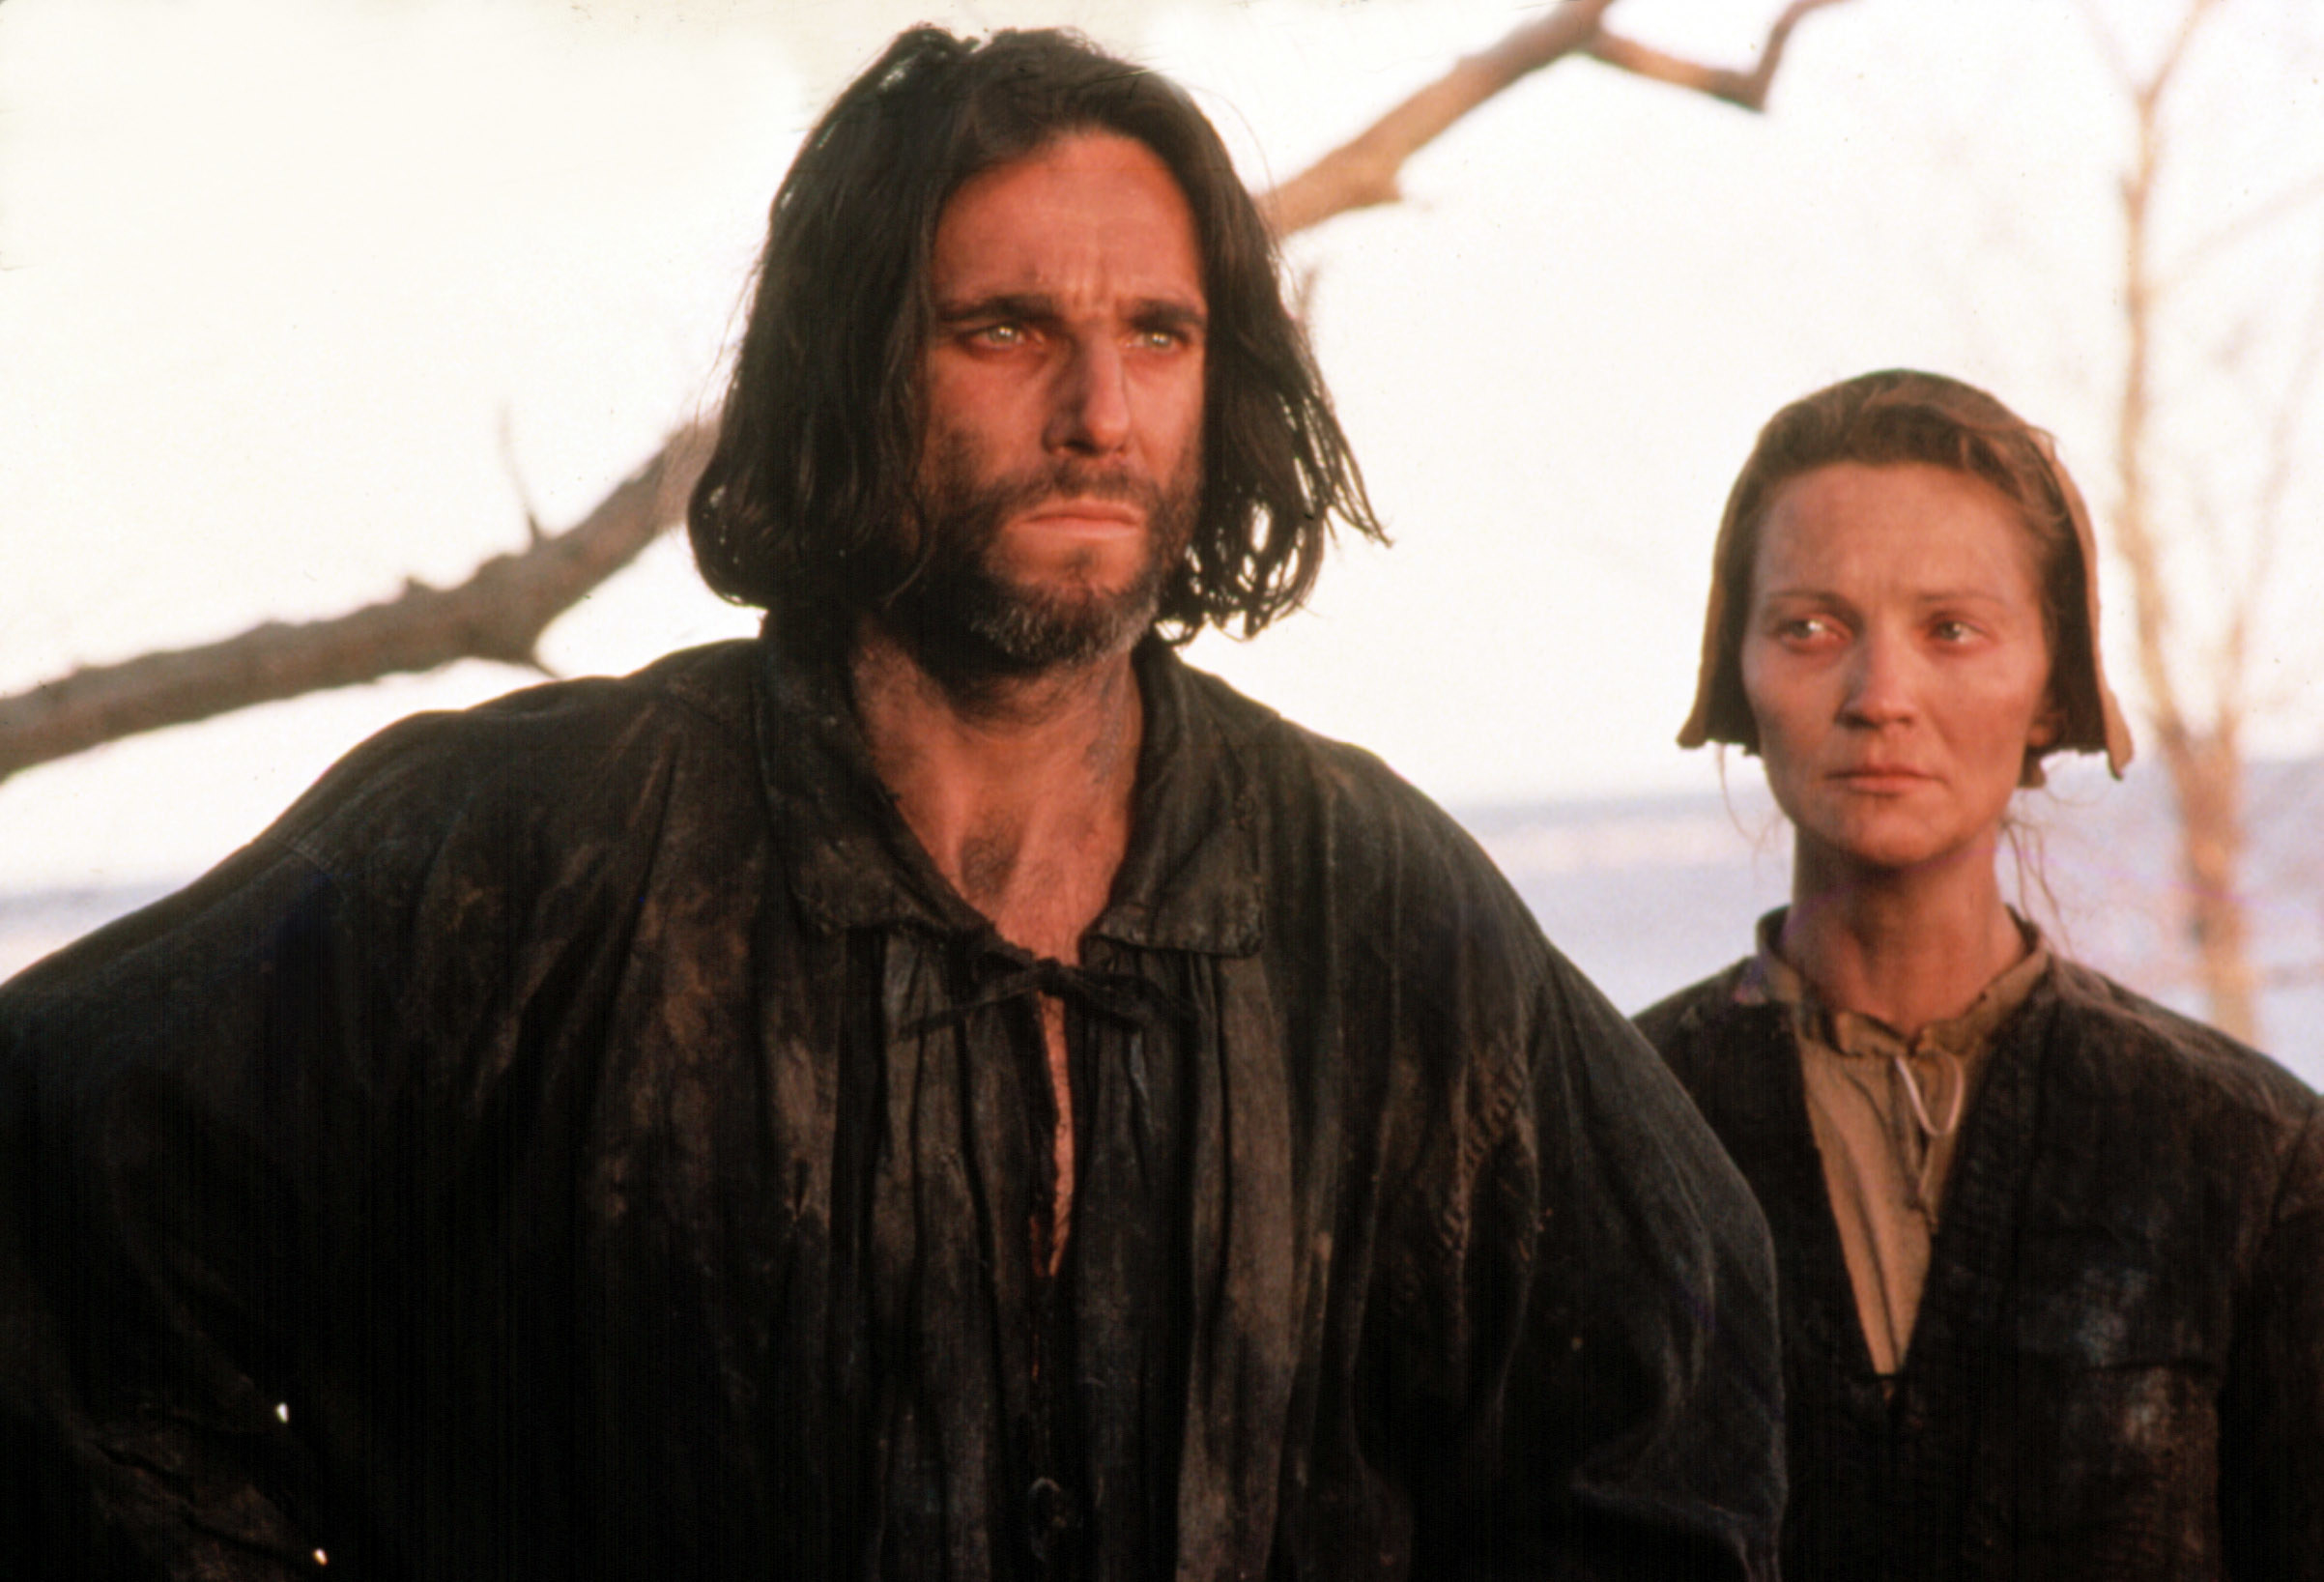 Daniel Day-Lewis and Joan Allen stand outdoors